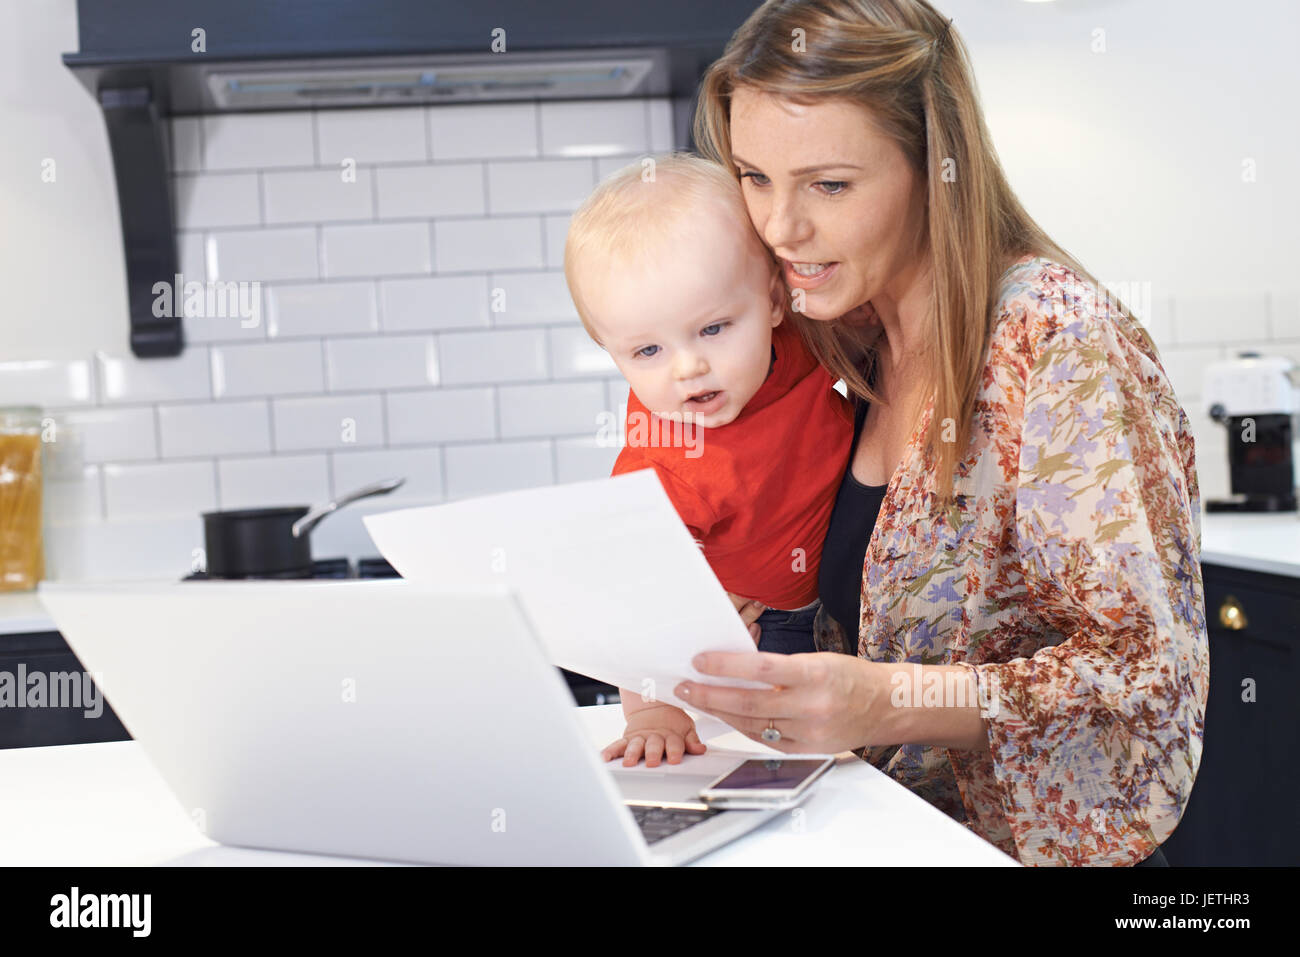 Busy Mother With Baby Coping With Stressful Day At Home Stock Photo